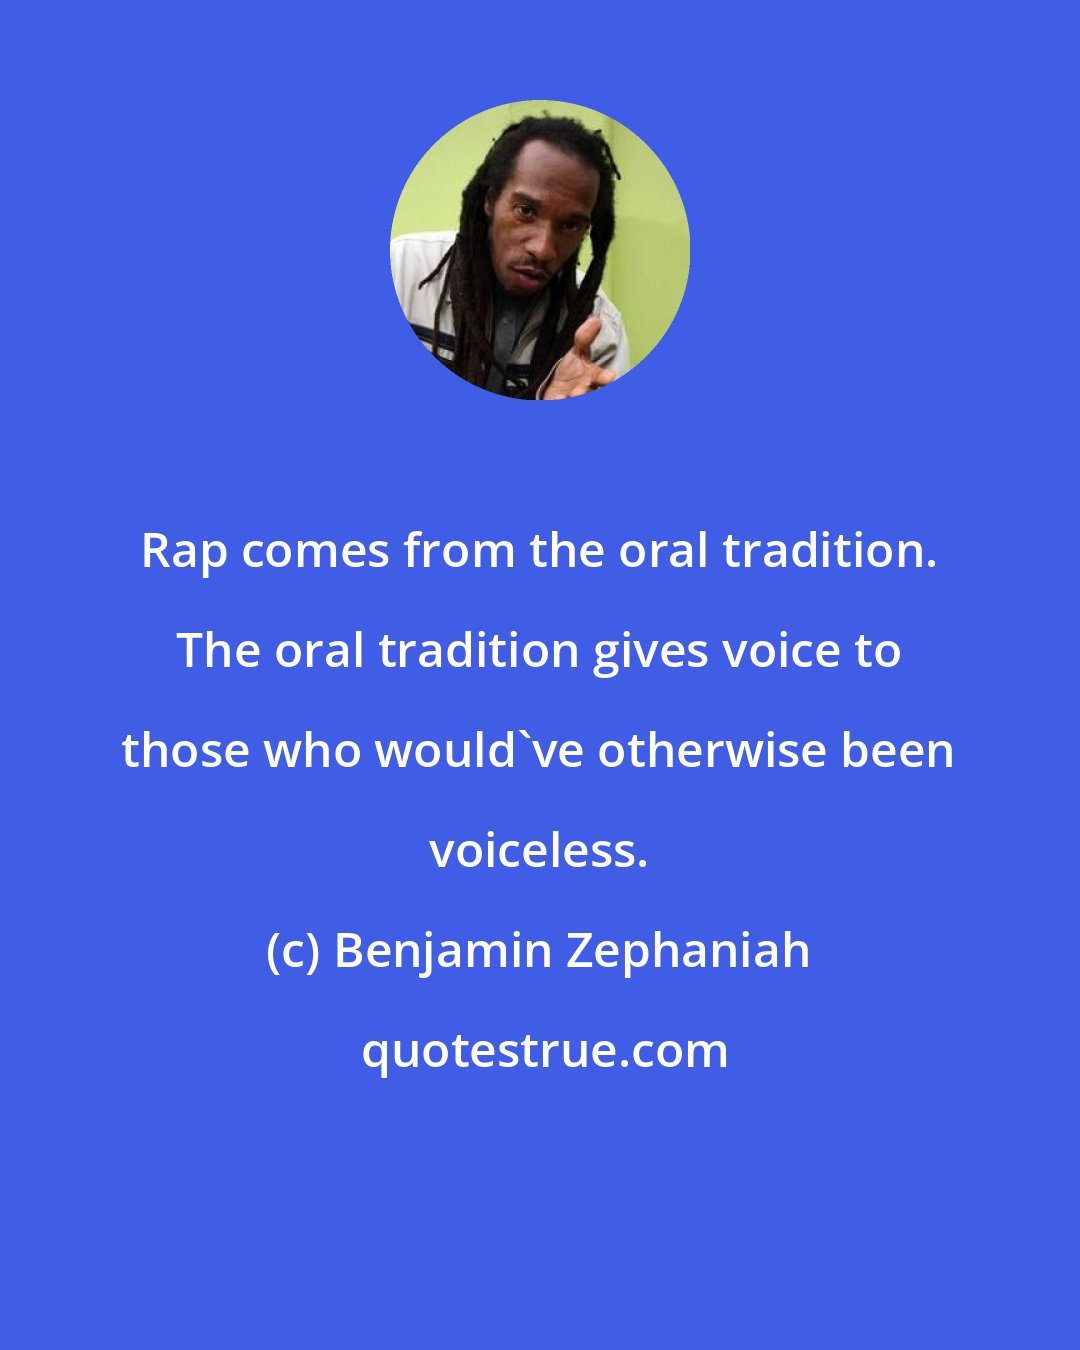 Benjamin Zephaniah: Rap comes from the oral tradition. The oral tradition gives voice to those who would've otherwise been voiceless.